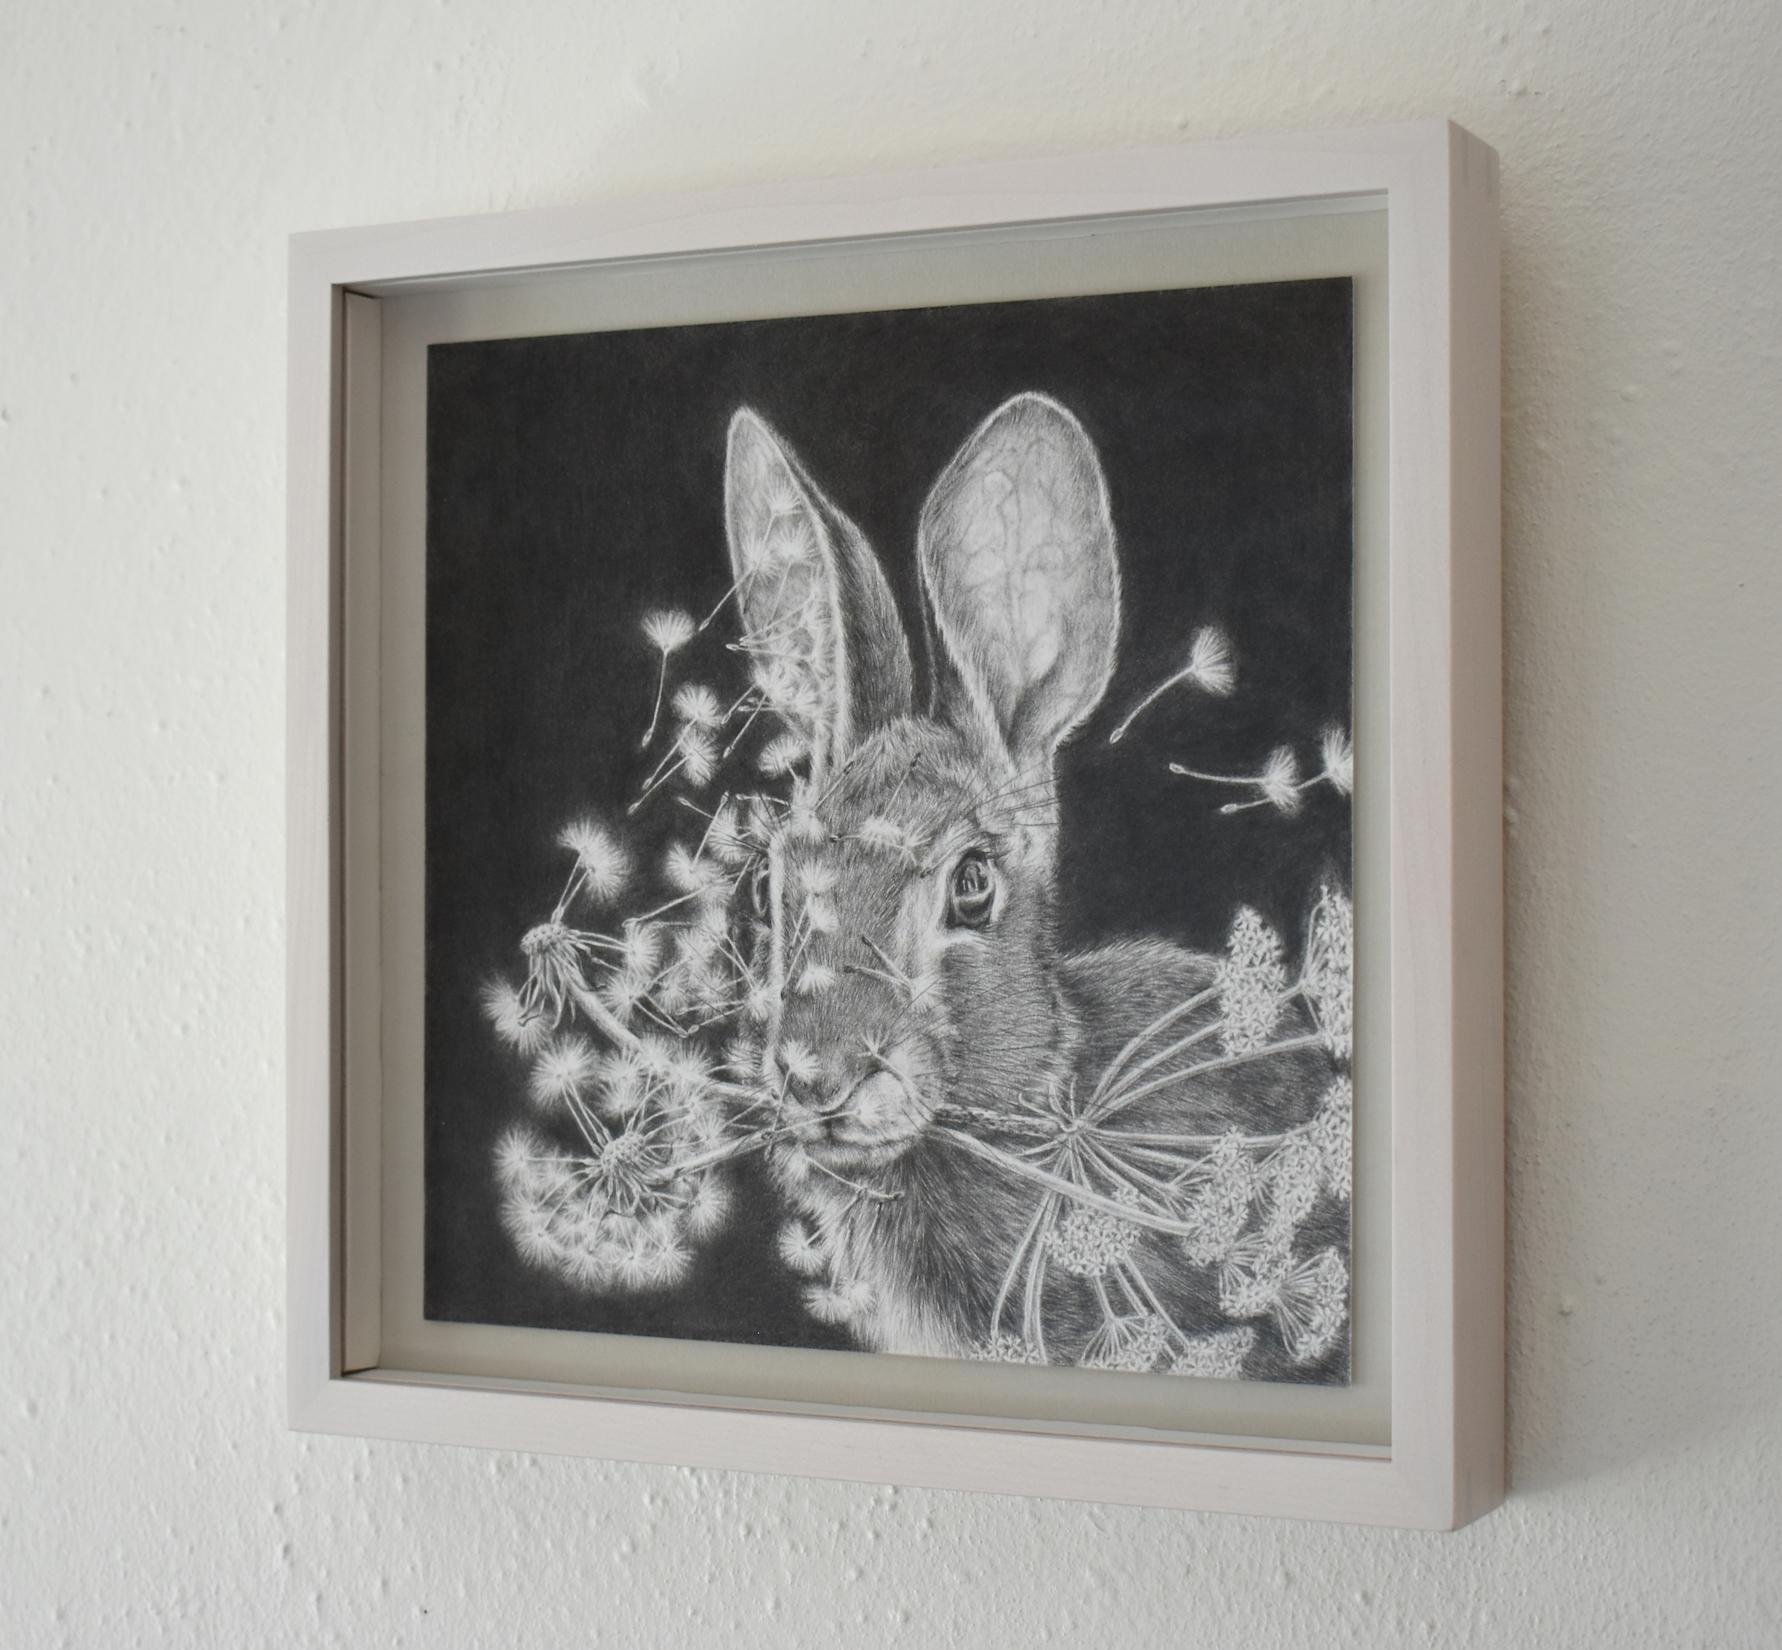 This graphite drawing on Bristol paper depicts a rabbit surrounded by floating bits of dandelions that have gone to seed against a dark black background. Fox's excellent use of material allow her to blend multiple images together, creating a